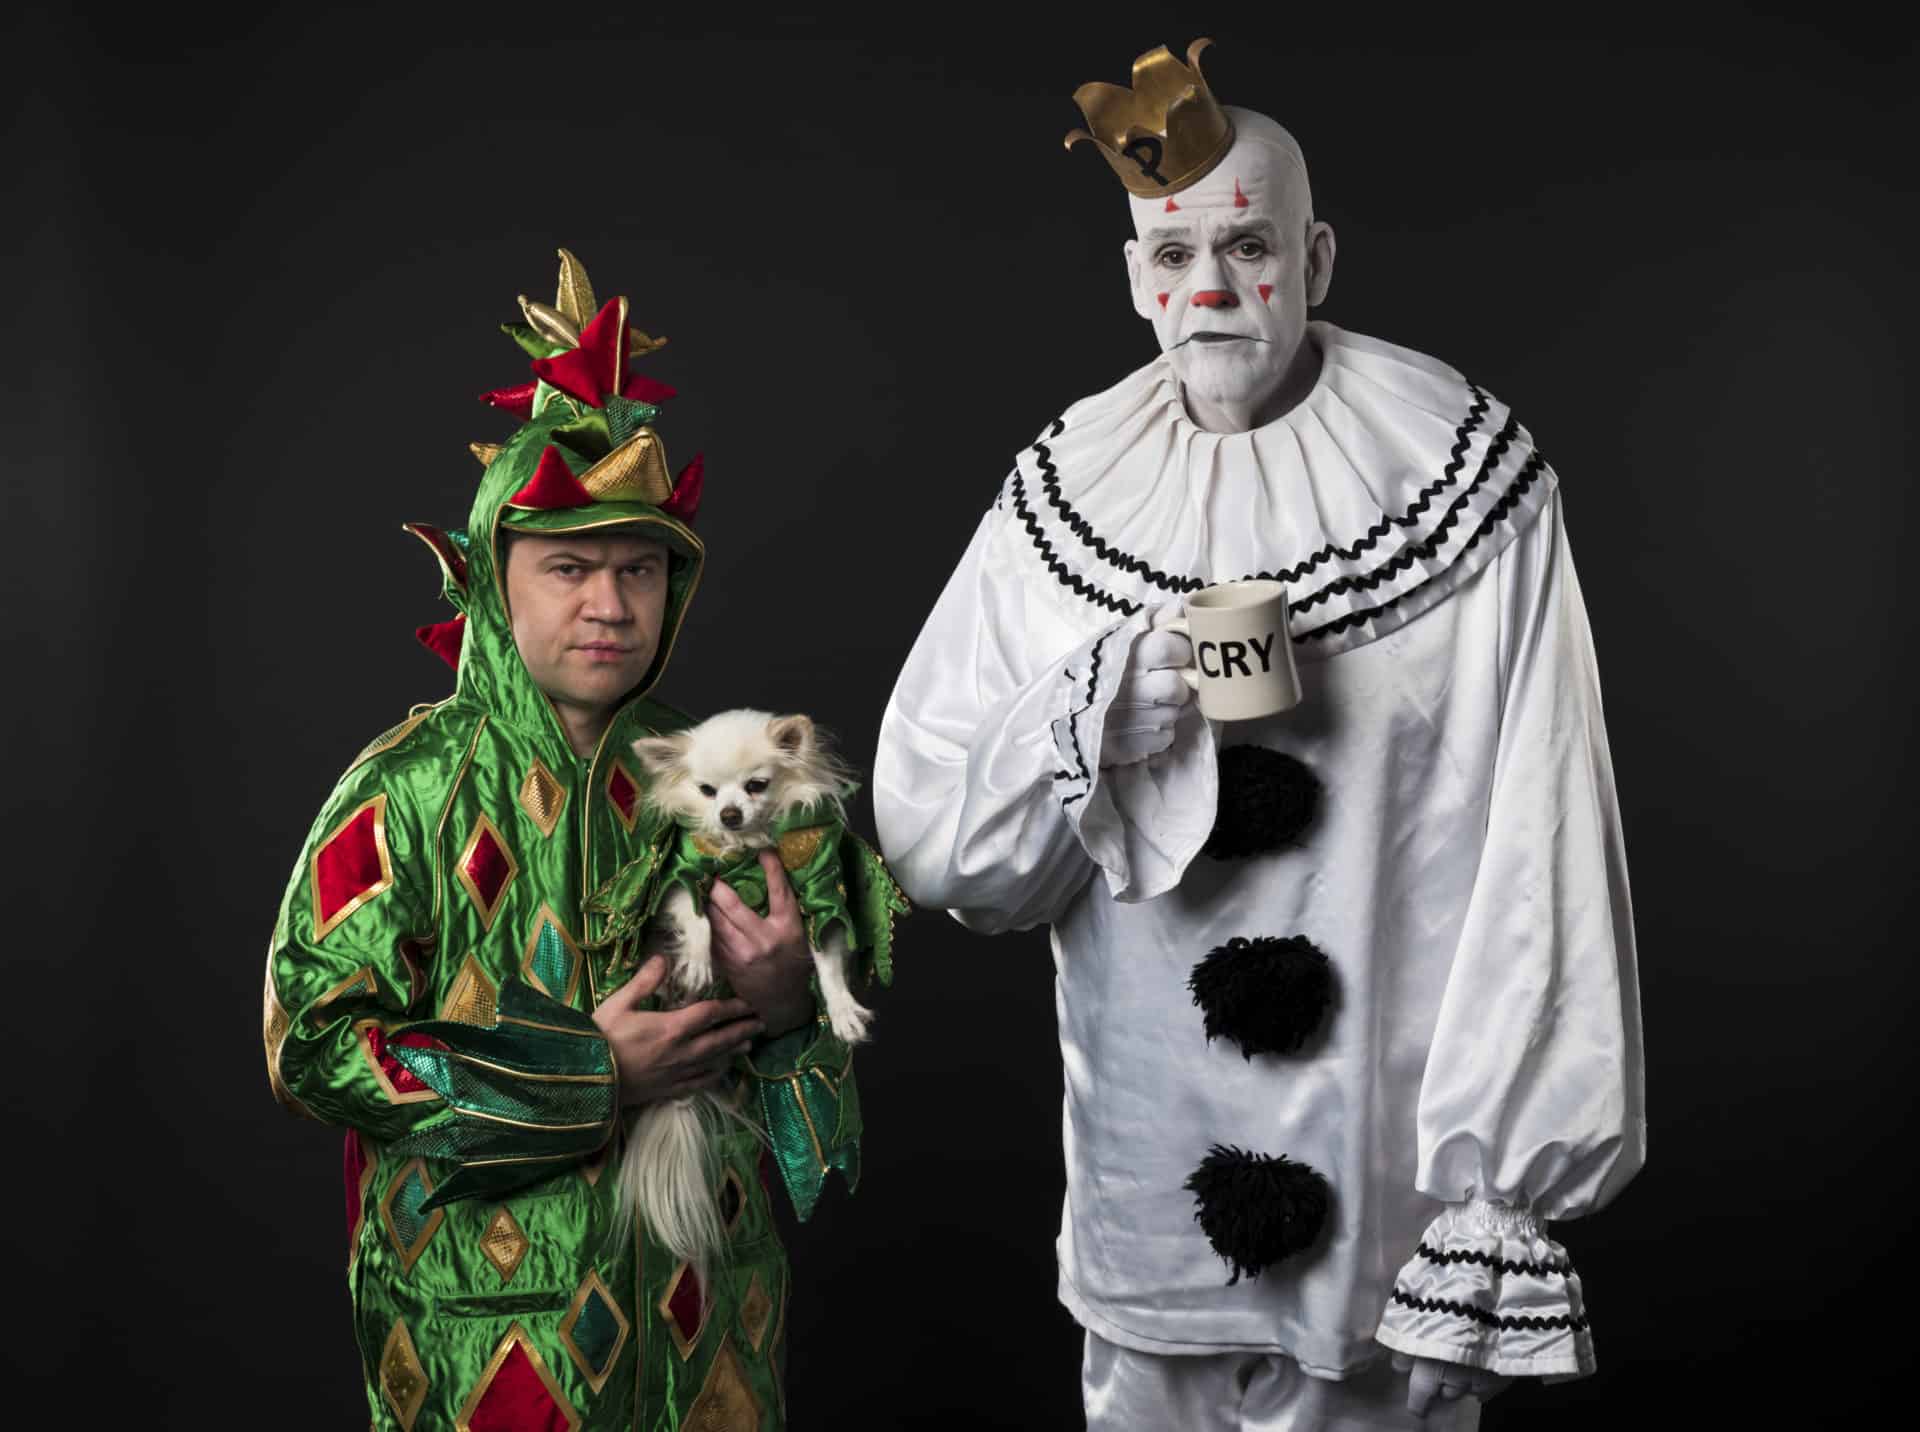 Piff the Magic Dragon stands in his green, scaly dragon skin costume holding his chihuahua, Mr. Piffles. Puddles Pity Party has white face paint on and a white clown outfit. He looks sad and is holding a mug that reads "Cry"